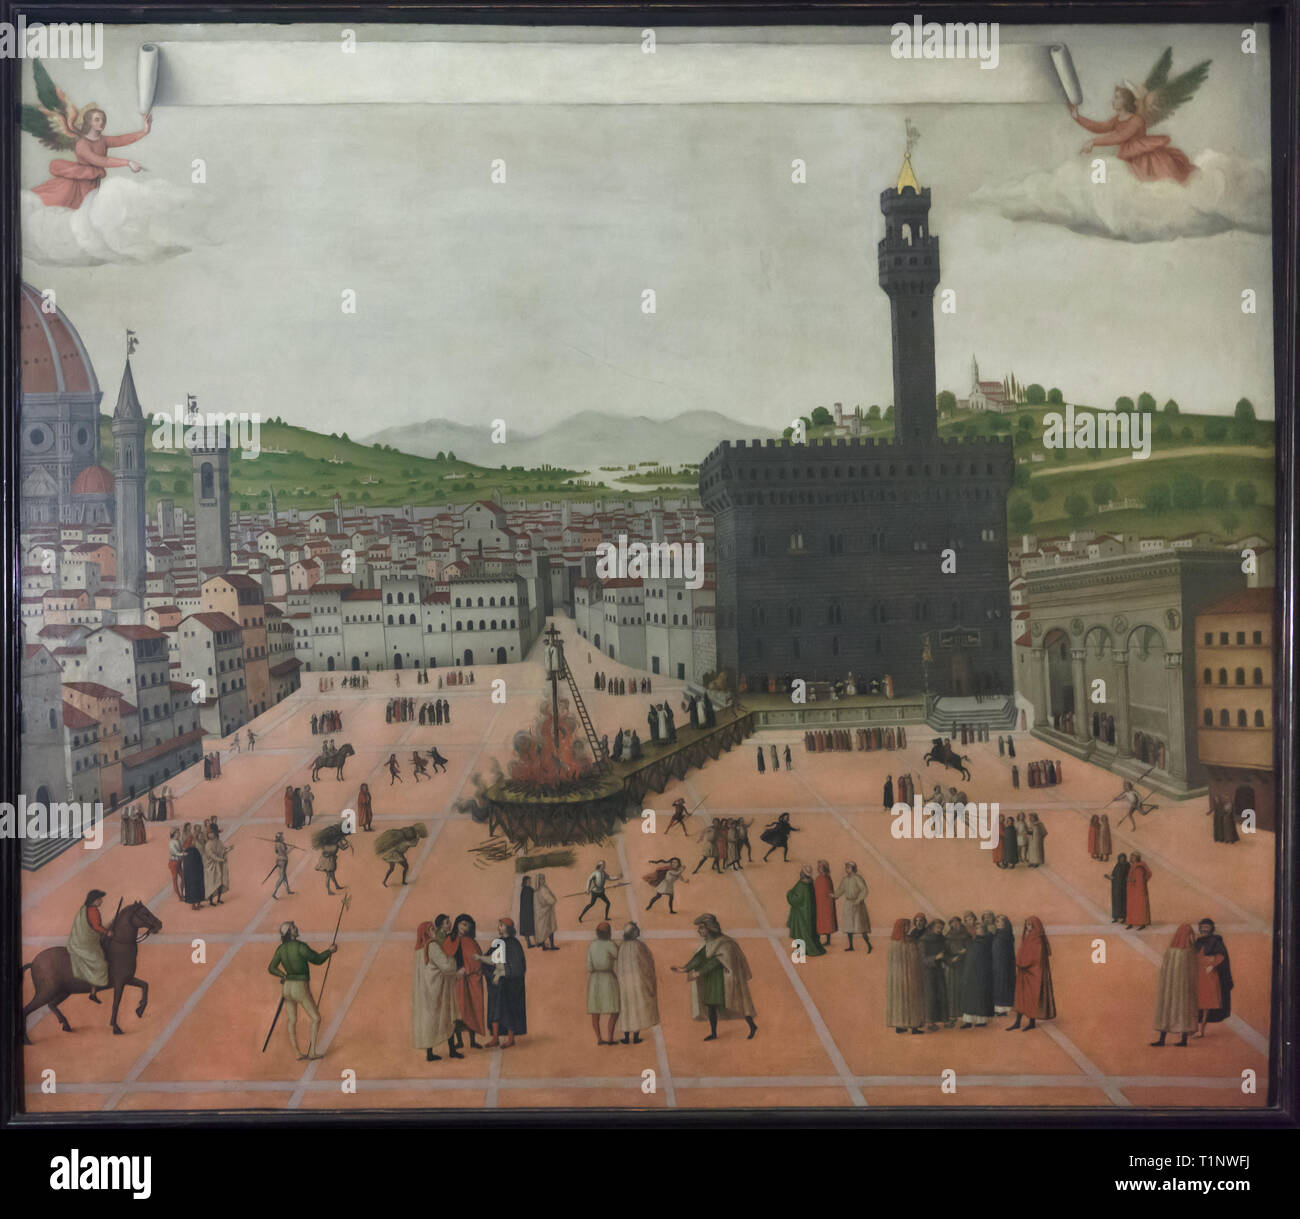 Painting 'Martyrdom of Girolamo Savonarola in Piazza della Signoria on 23 May 1498' by an unknown painter dated from the end of the 15th century on display in Savonarola's cell at the San Marco Convent (Convento di San Marco), now the San Marco Museum (Museo Nazionale di San Marco) in Florence, Tuscany, Italy. Stock Photo